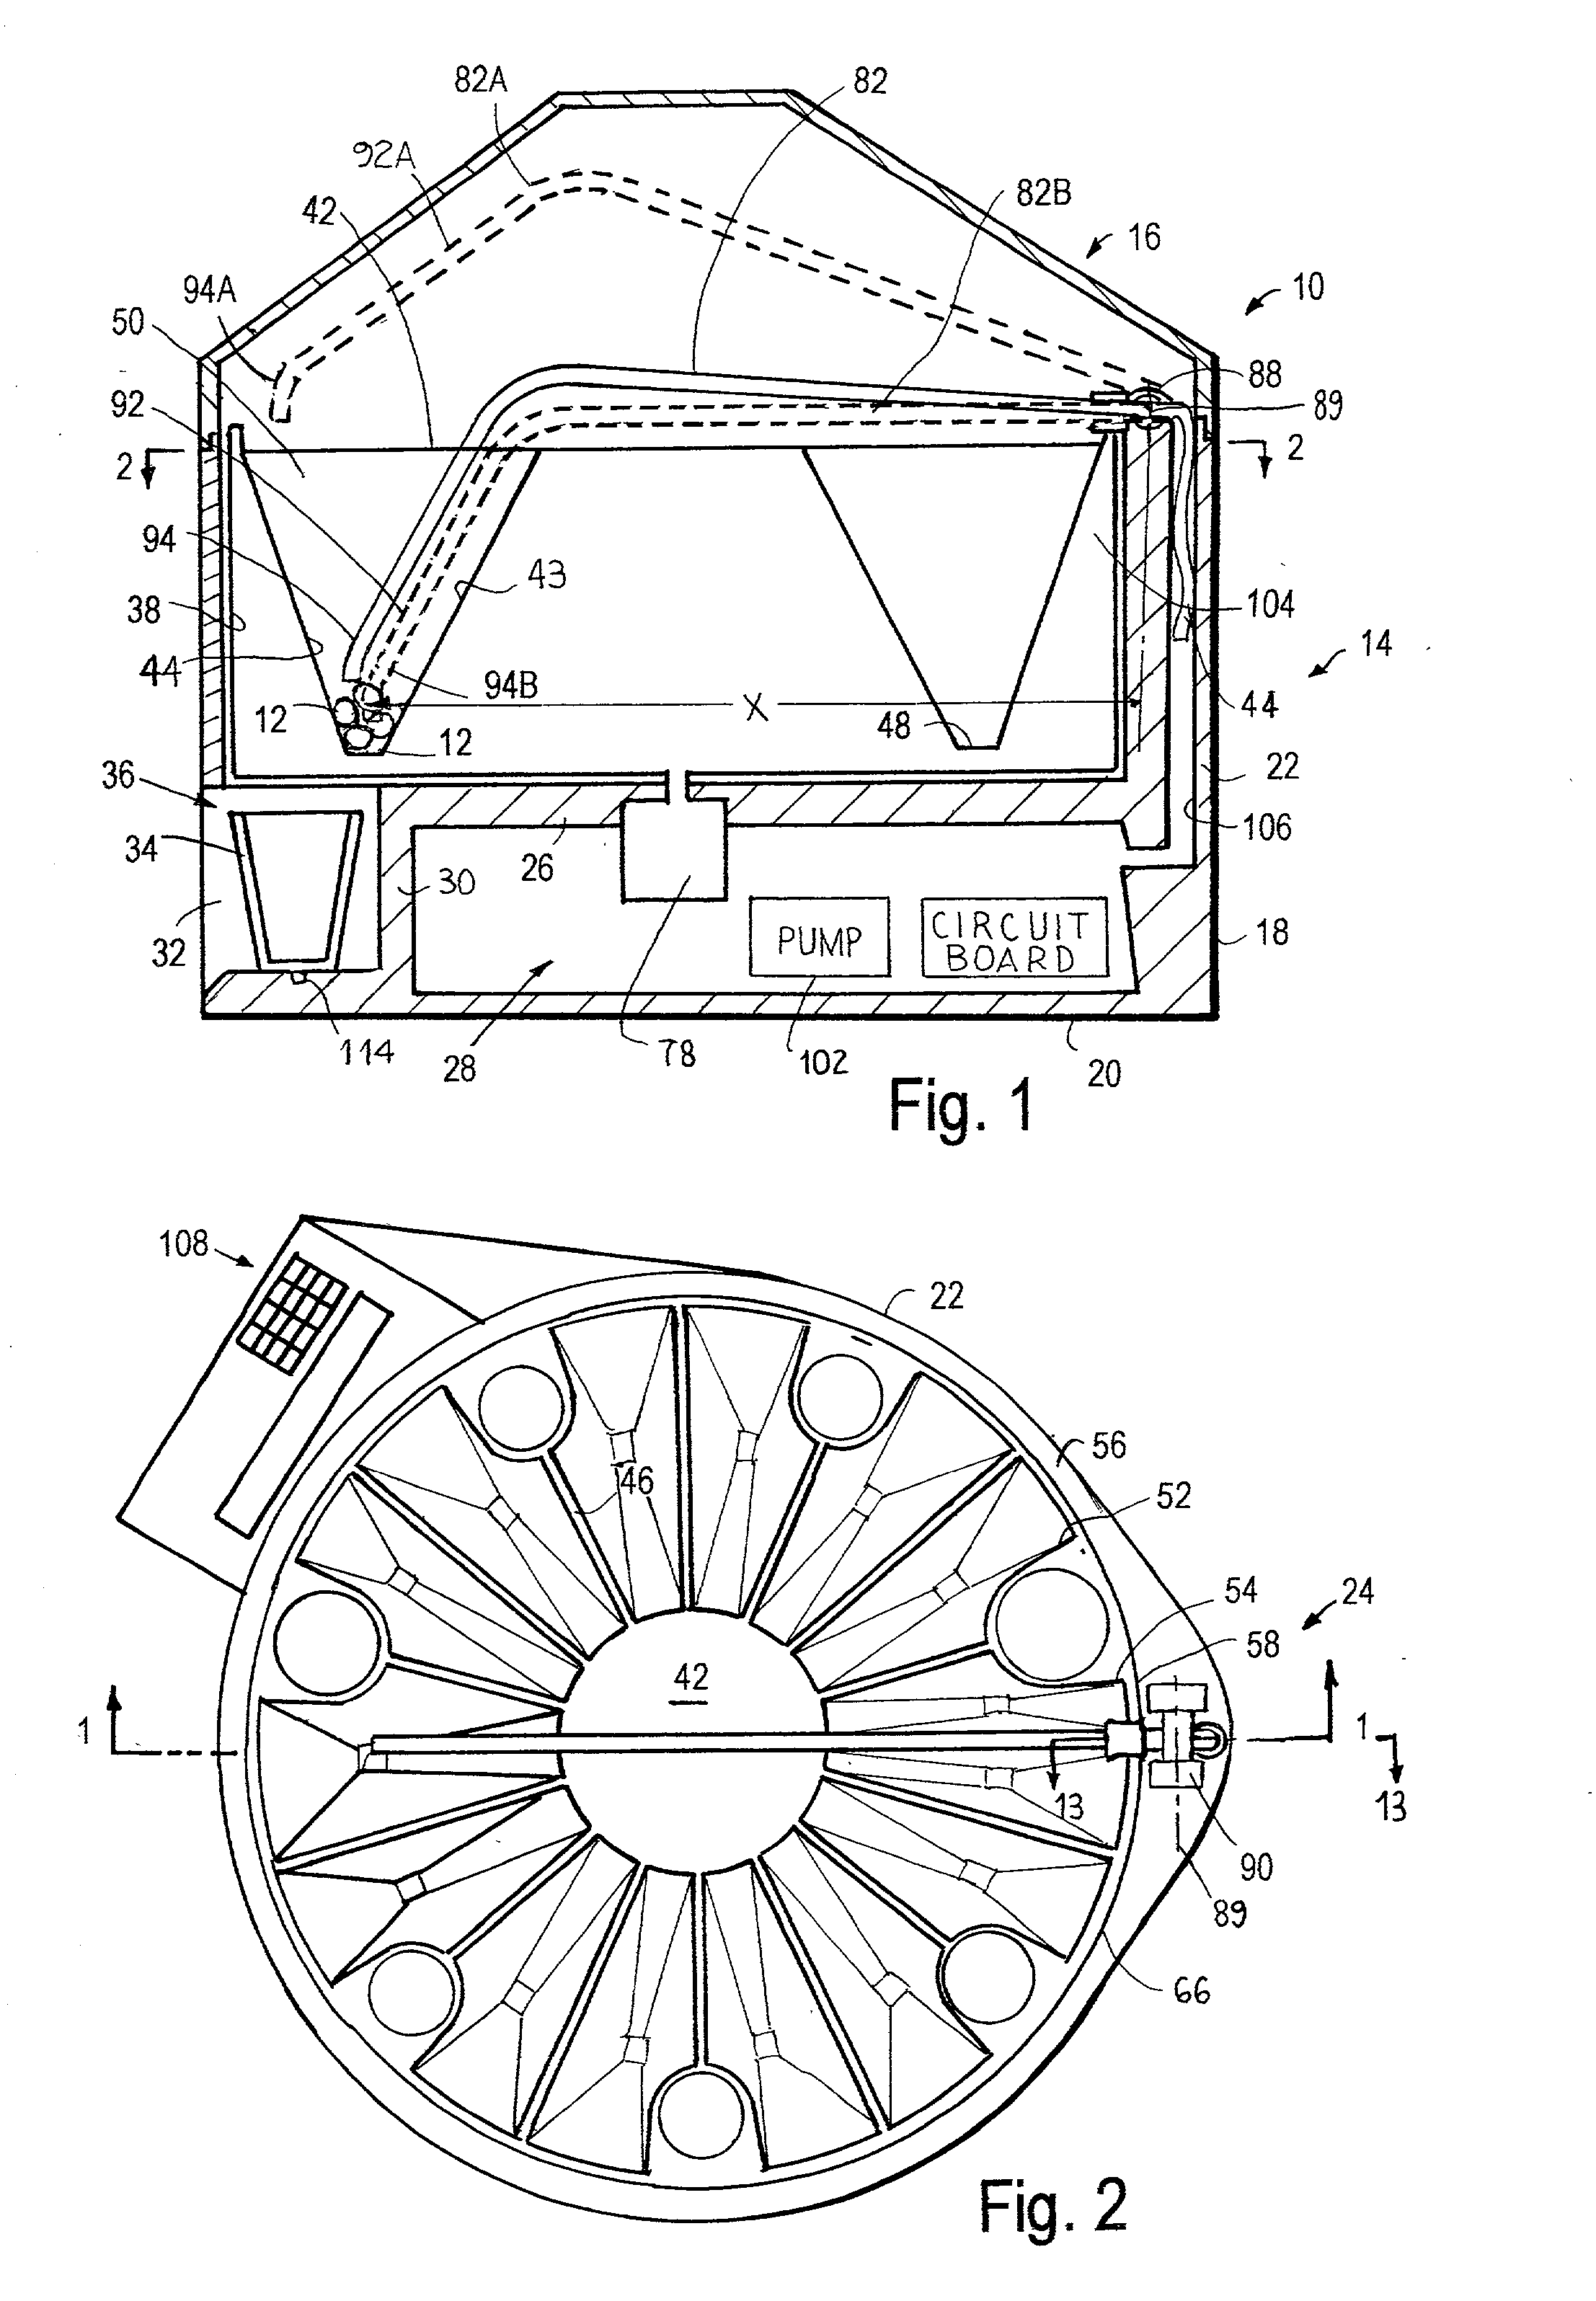 Apparatus and method for dispensing medication